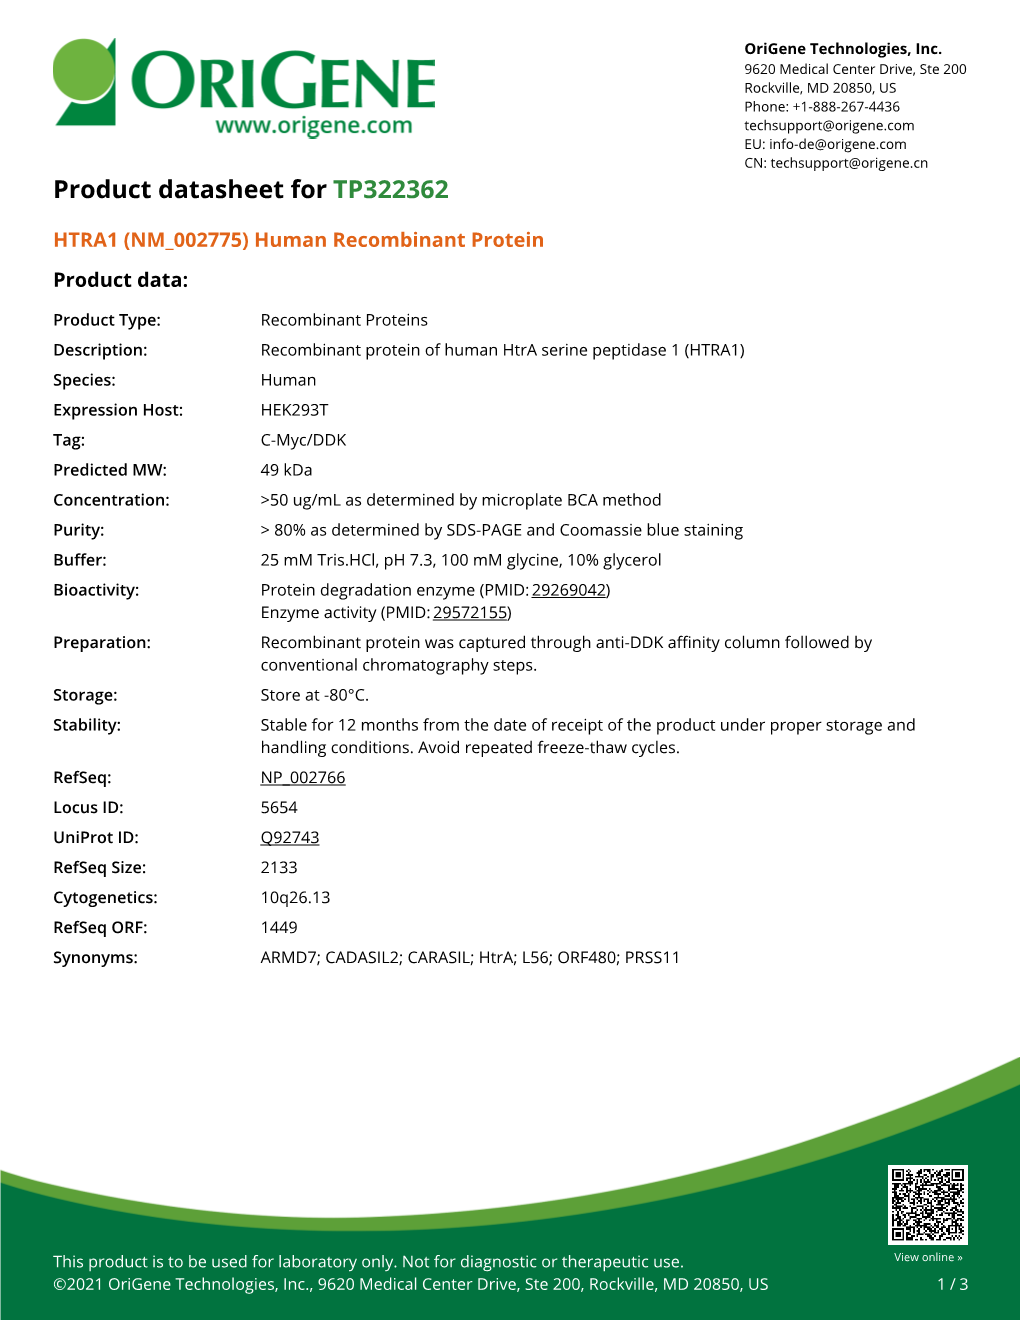 HTRA1 (NM 002775) Human Recombinant Protein Product Data